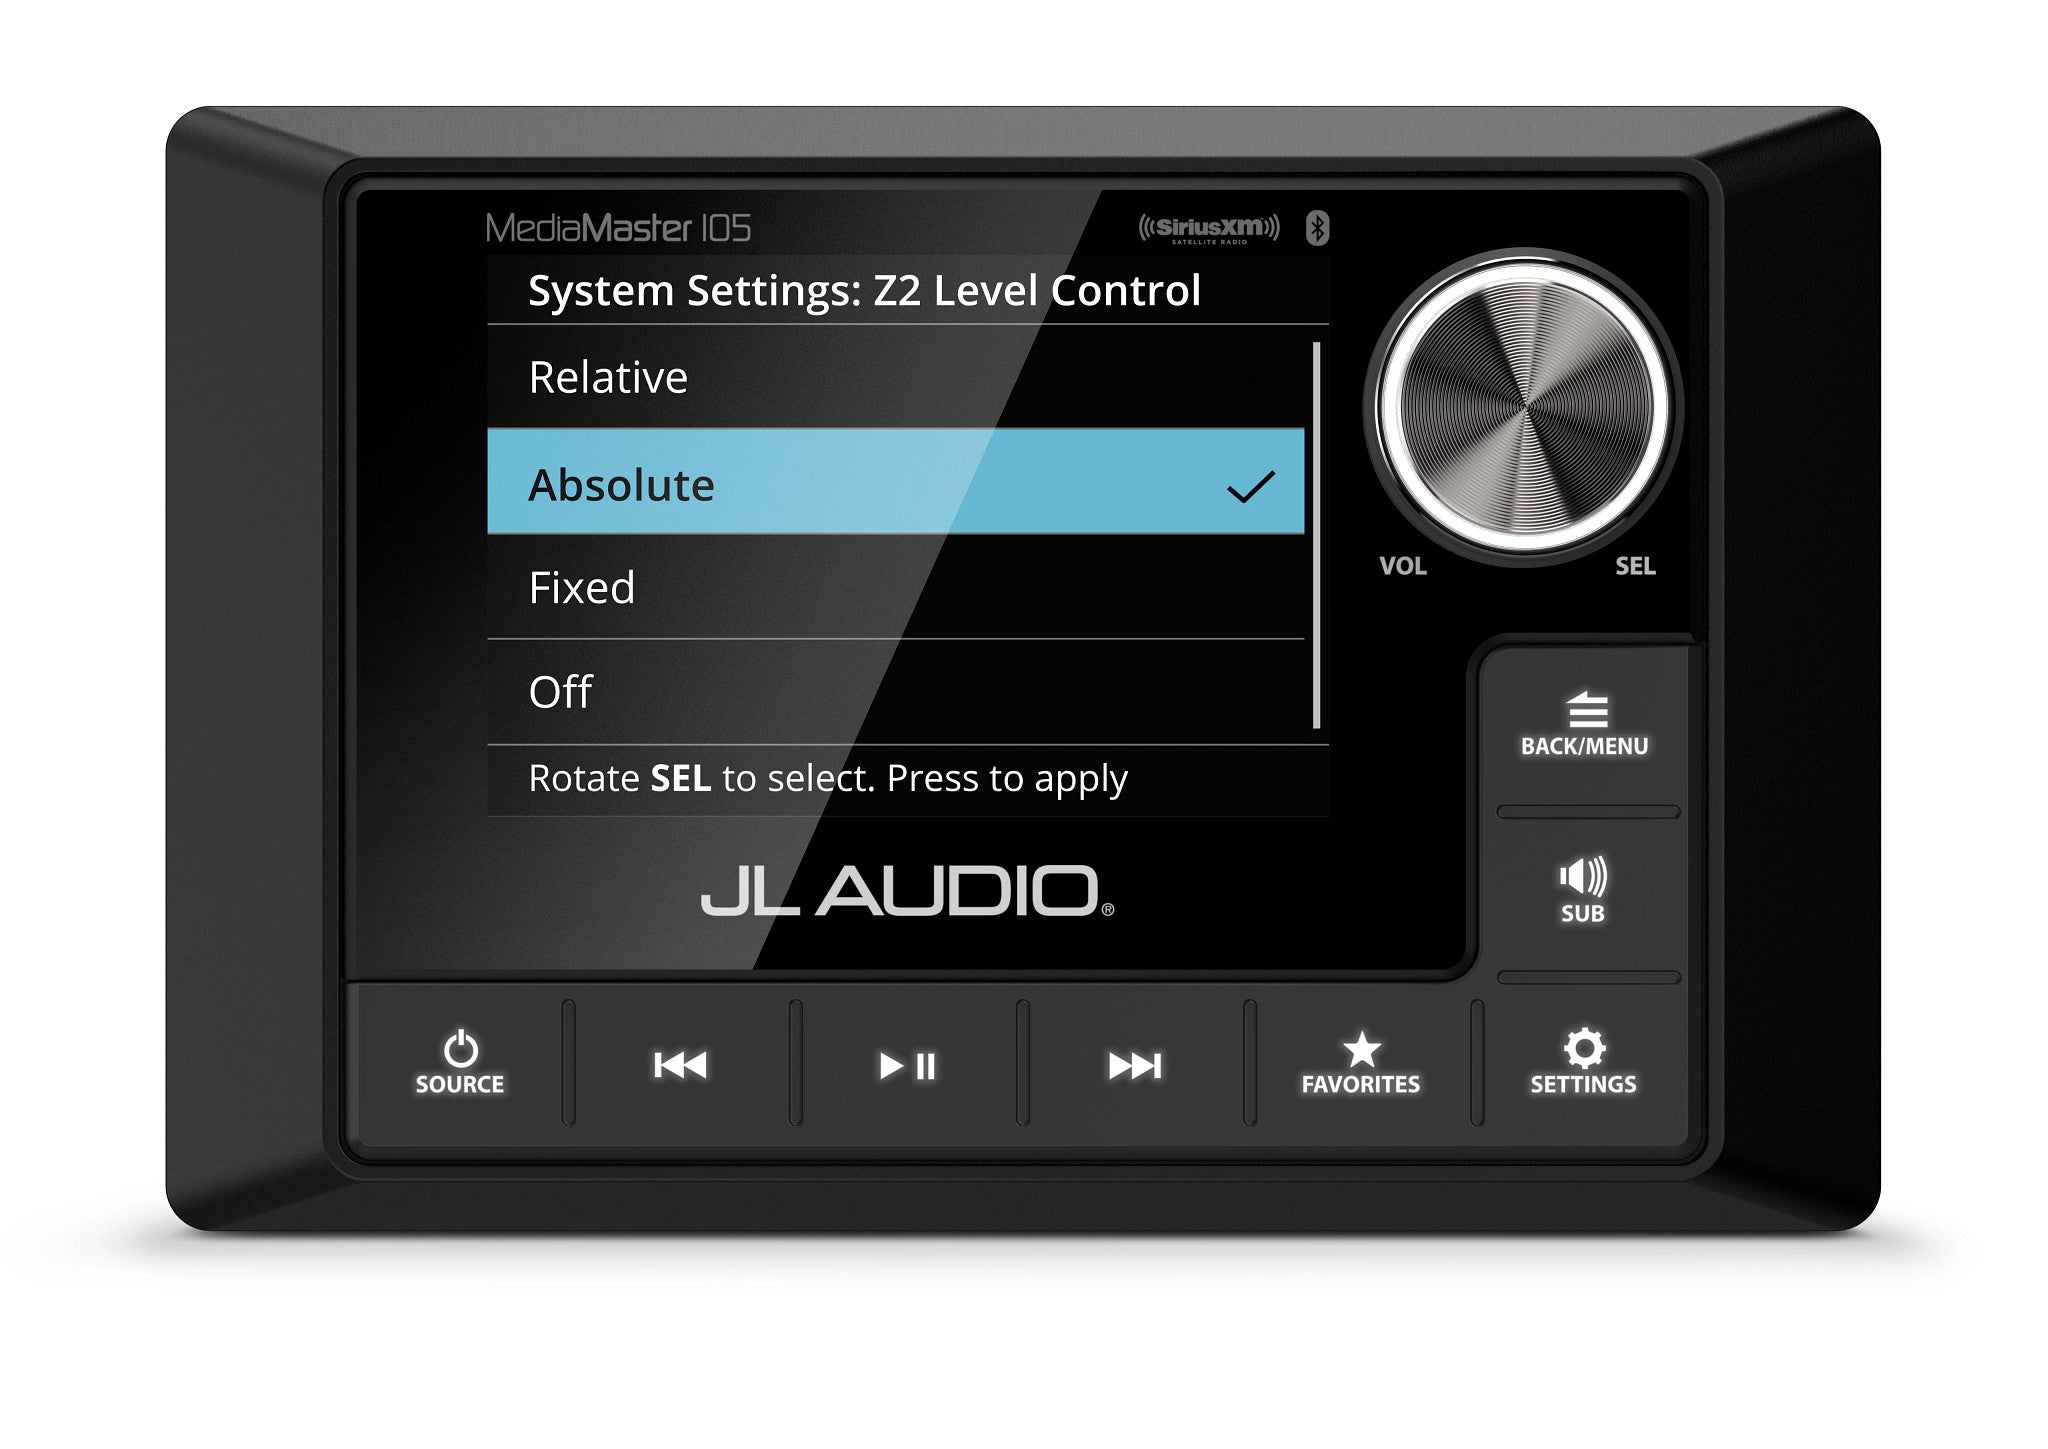 MediaMaster MM105 Front Overhead with System Settings screen adjusting Zone 2 level control to absolute